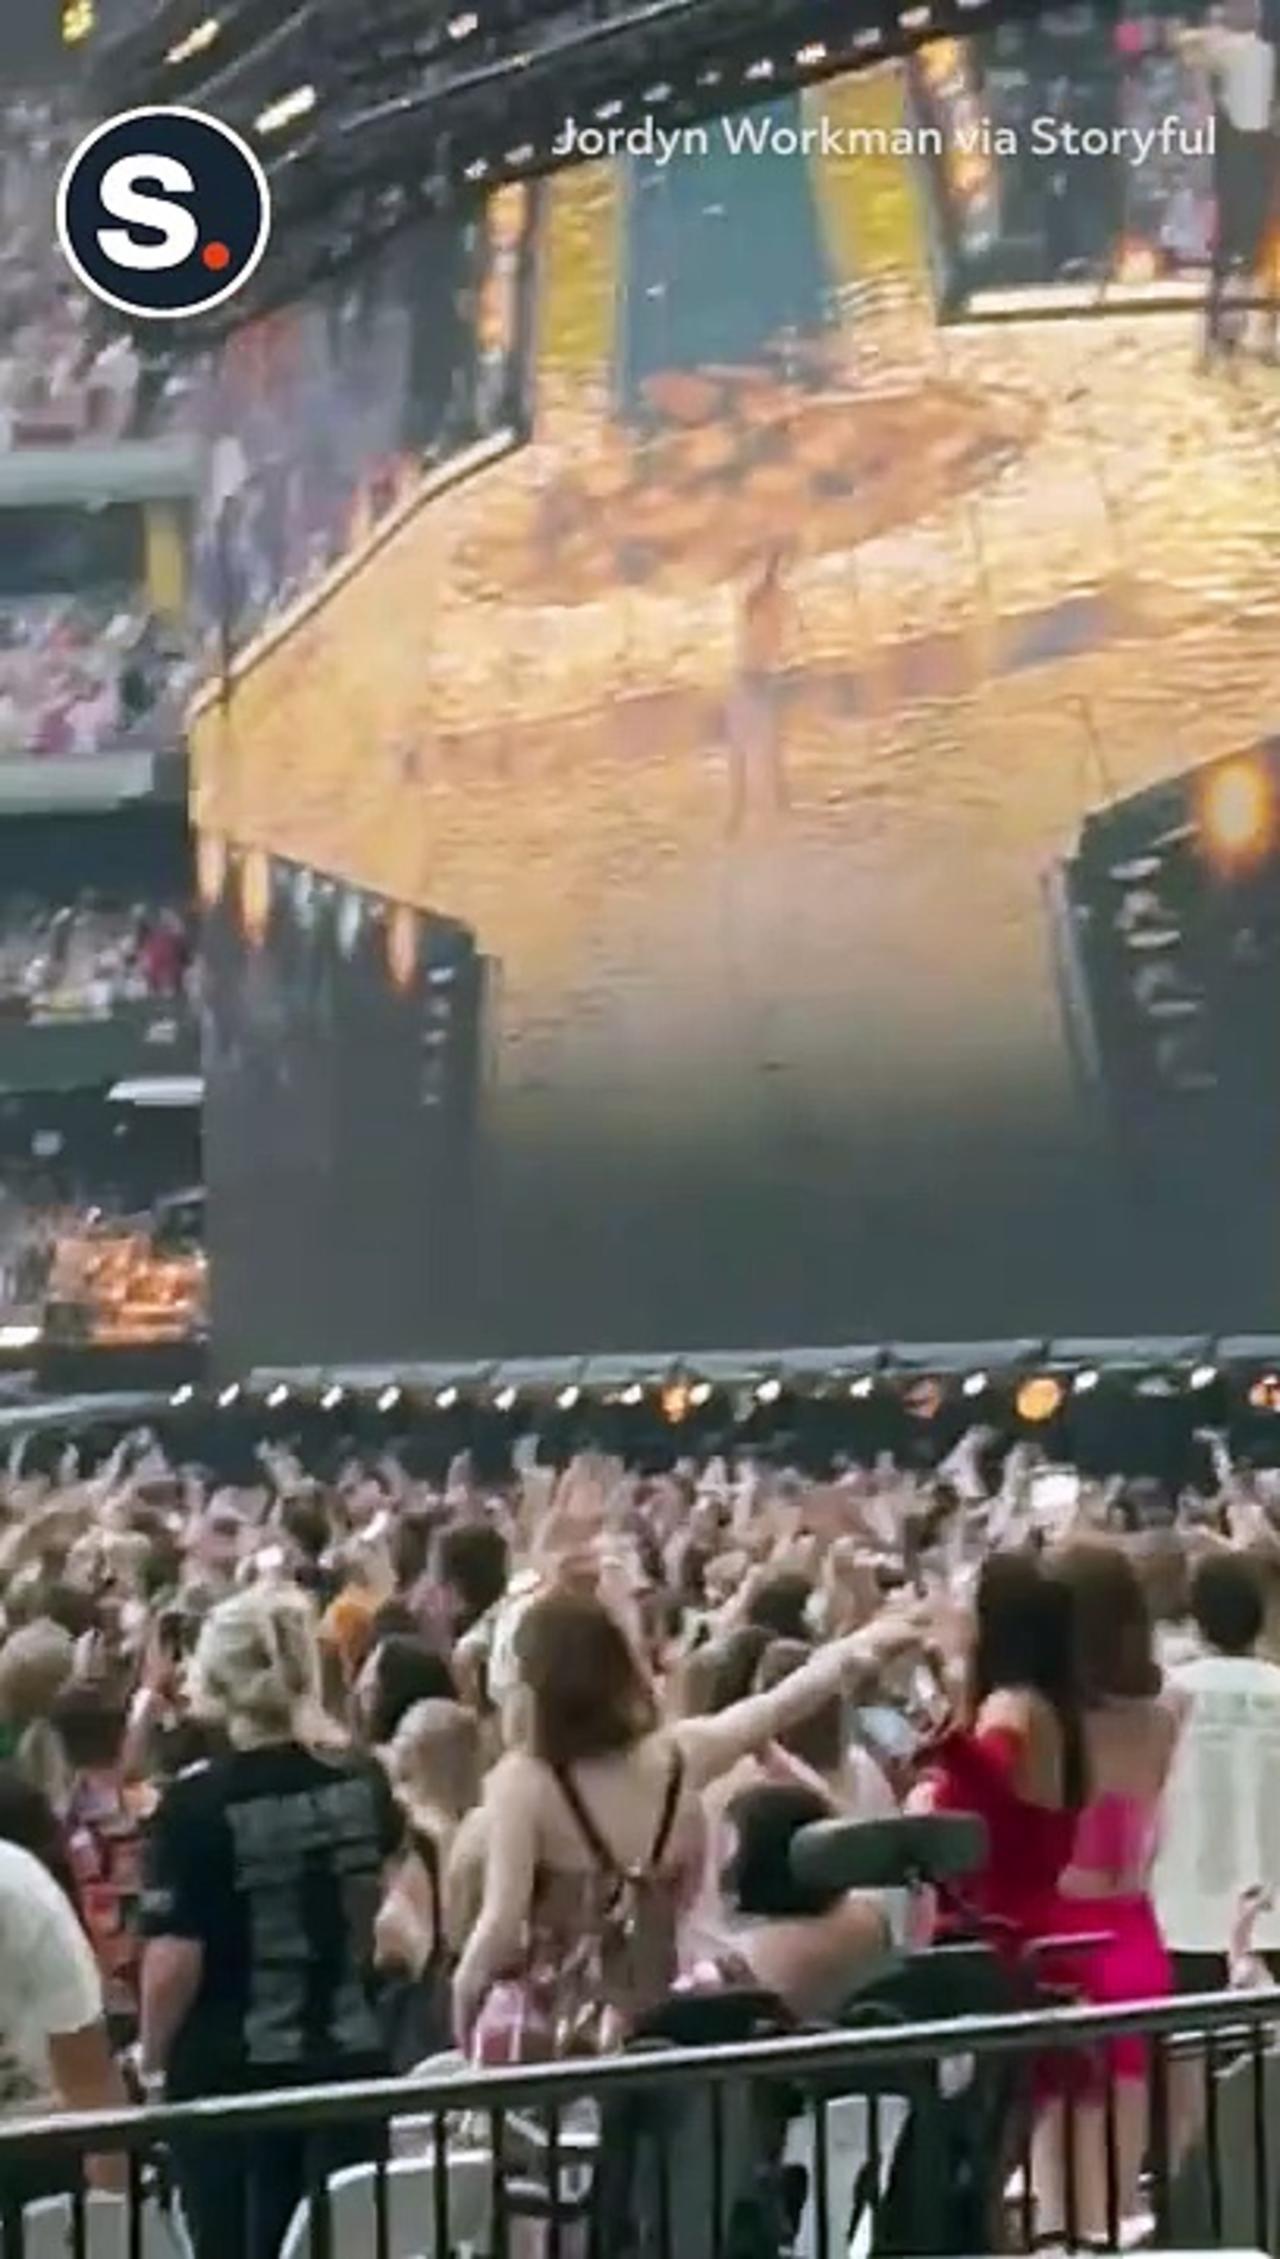 Dancing Security Guard Thrills Taylor Swift Crowd in Melbourne